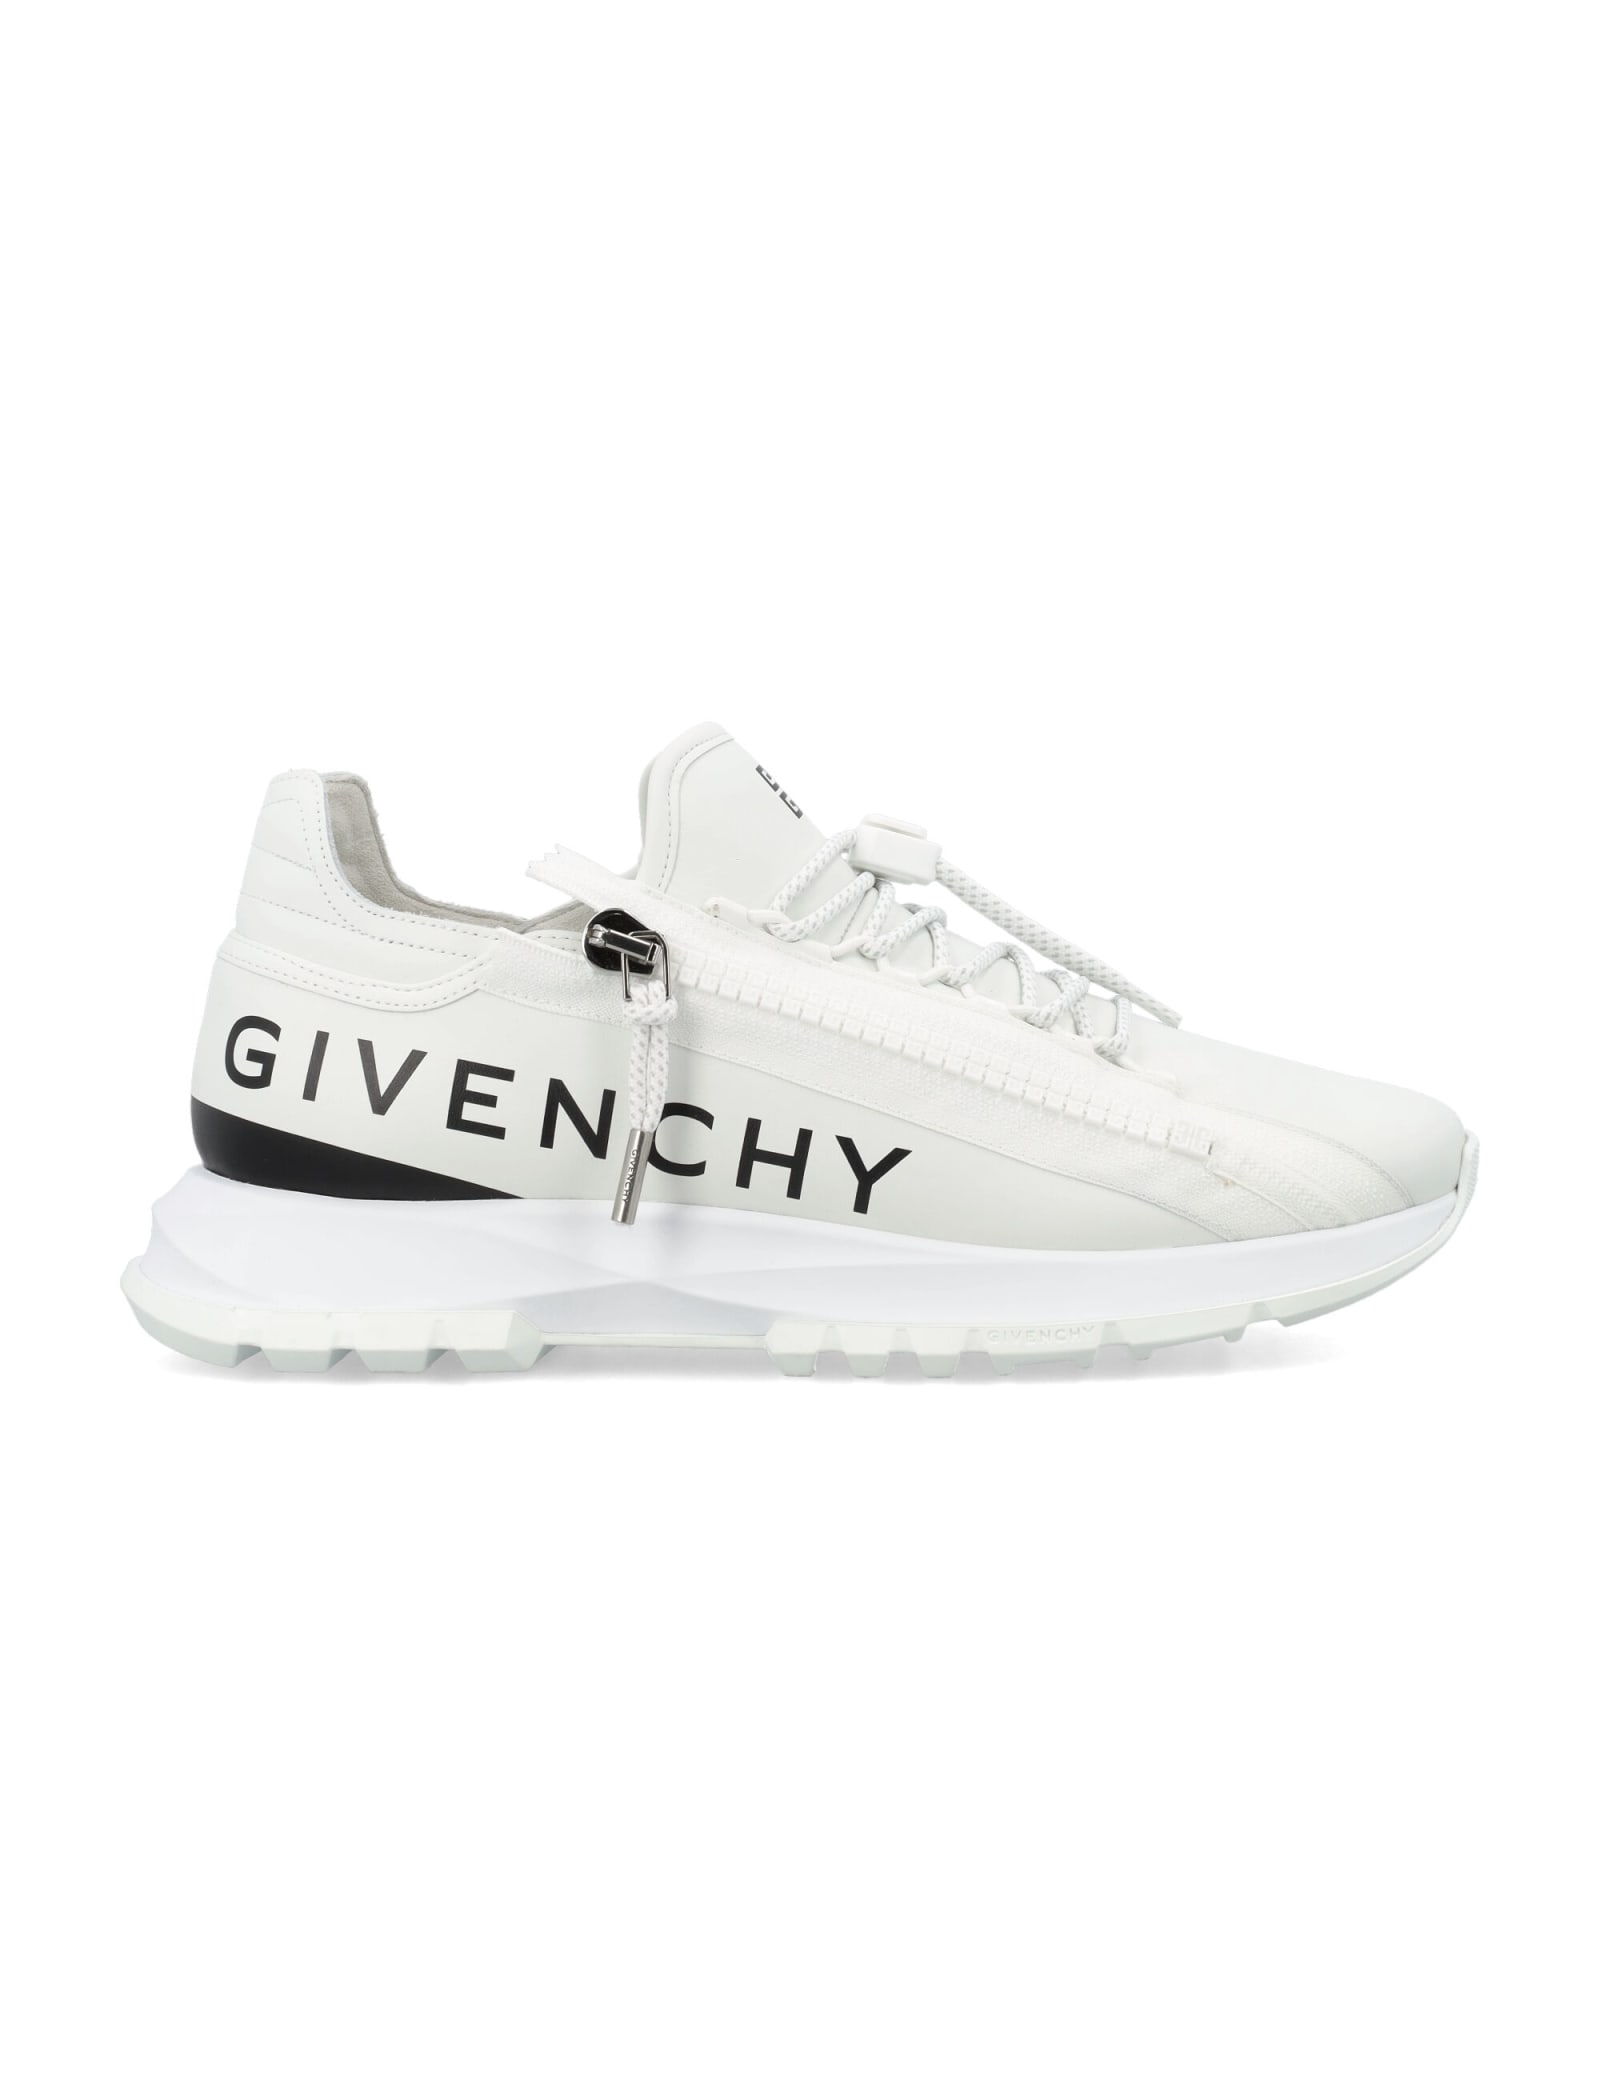 GIVENCHY SPECTRE RUNNER SNEAKERS IN LEATHER WITH ZIP